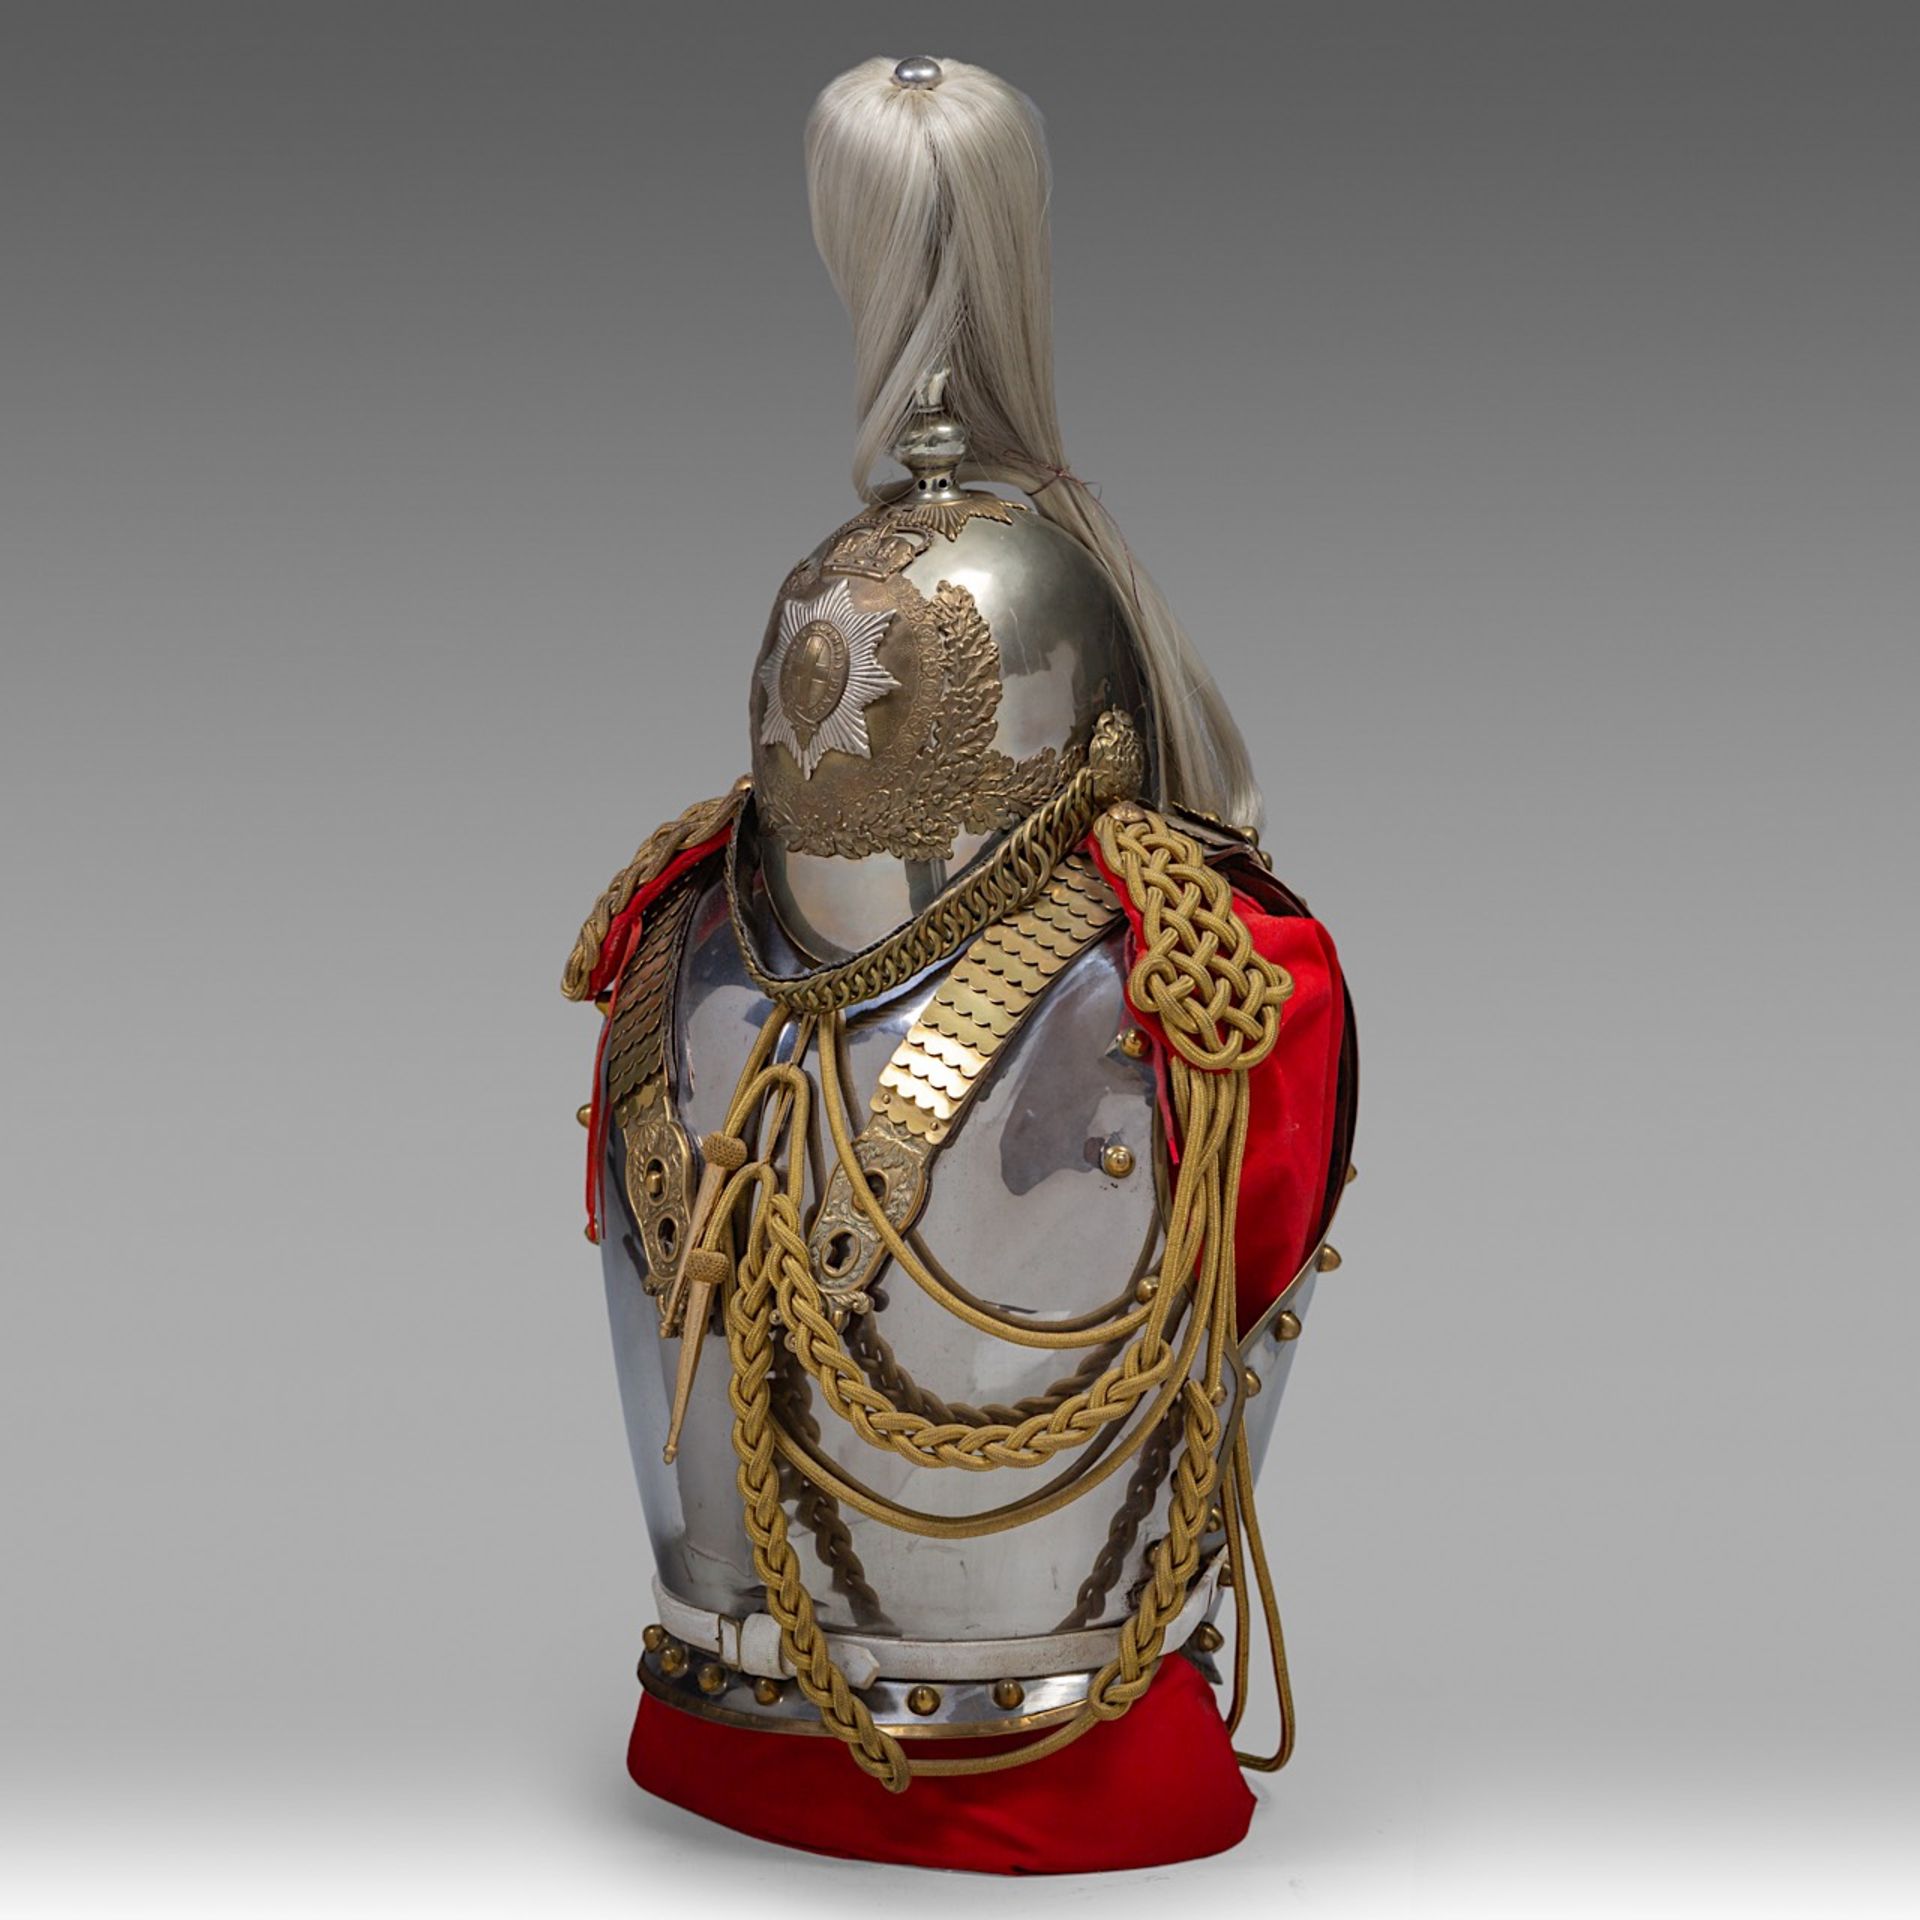 cuirass and helmet of the Royal Horse guards, metal and brass,1952 (Eliabeth II) 88 x 36 x 44 cm. (3